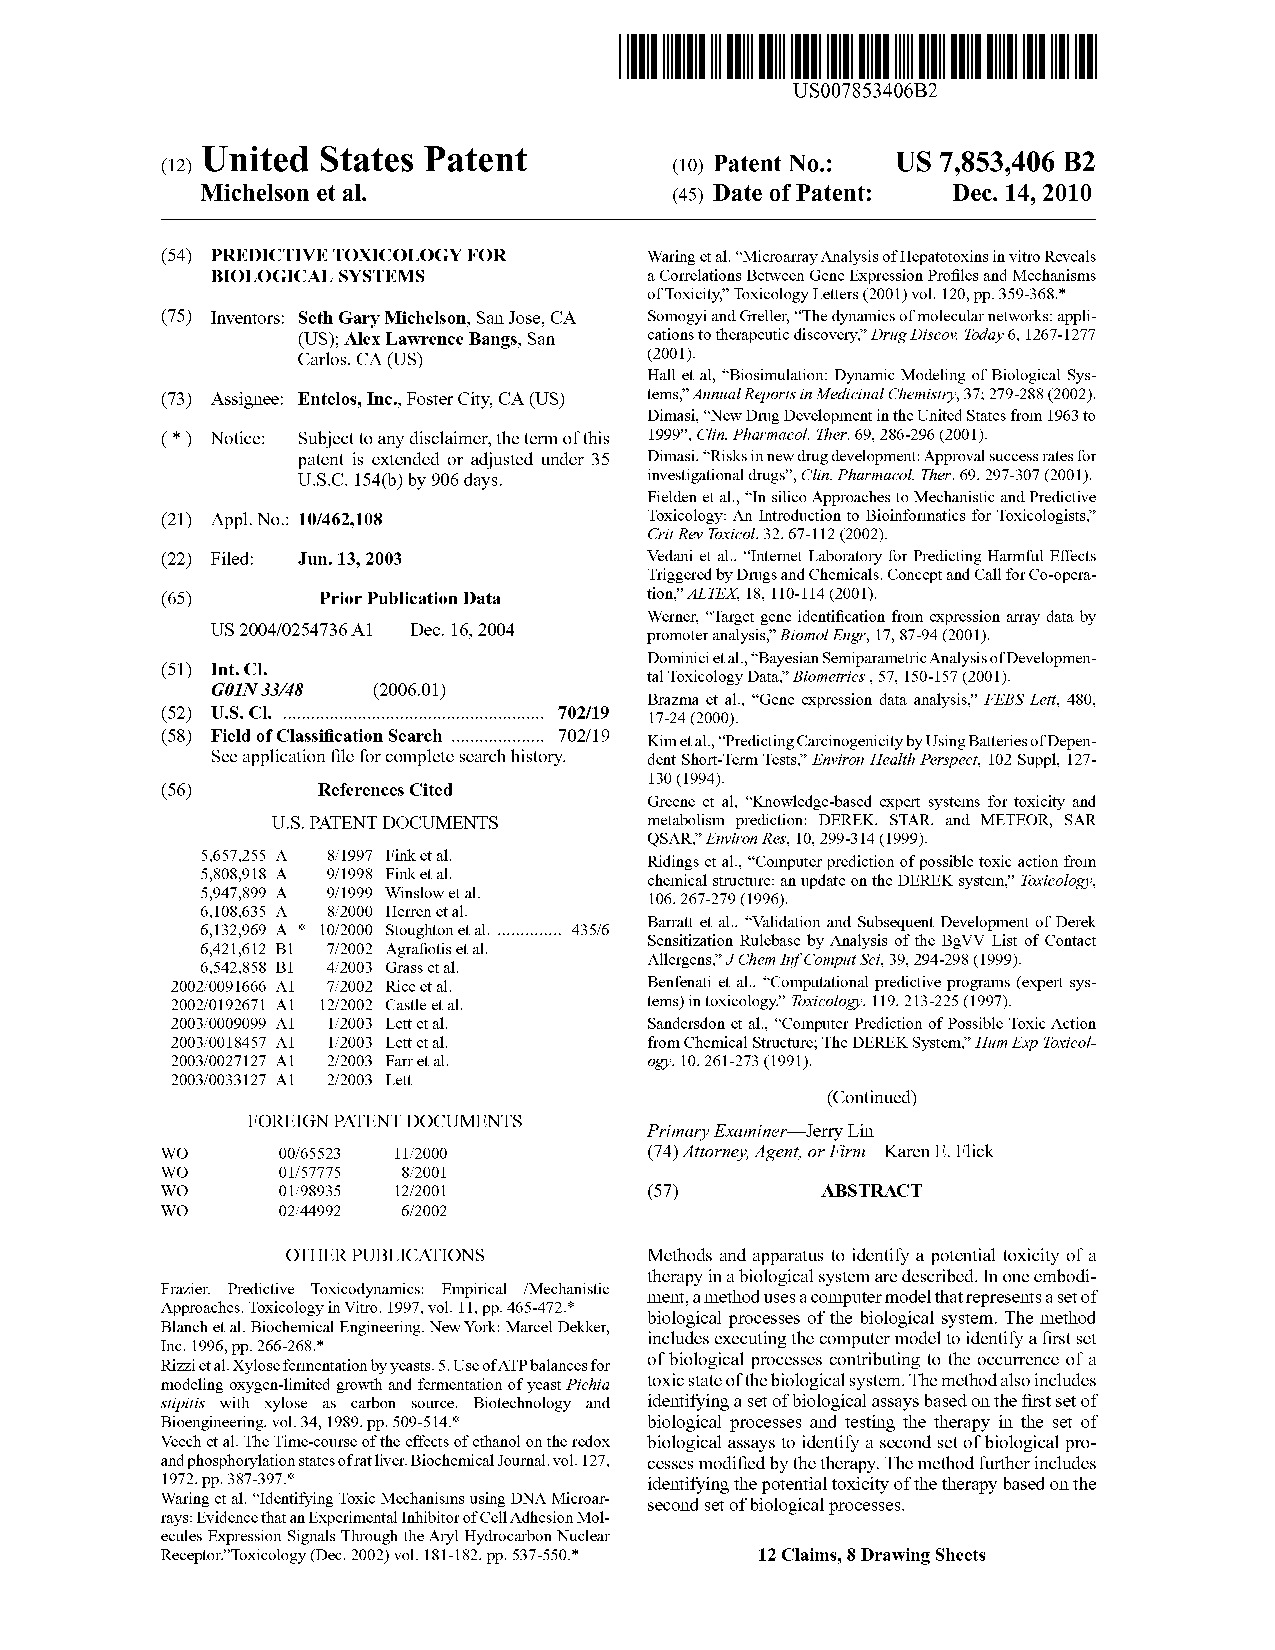 Predictive toxicology for biological systems - Patent 7,853,406